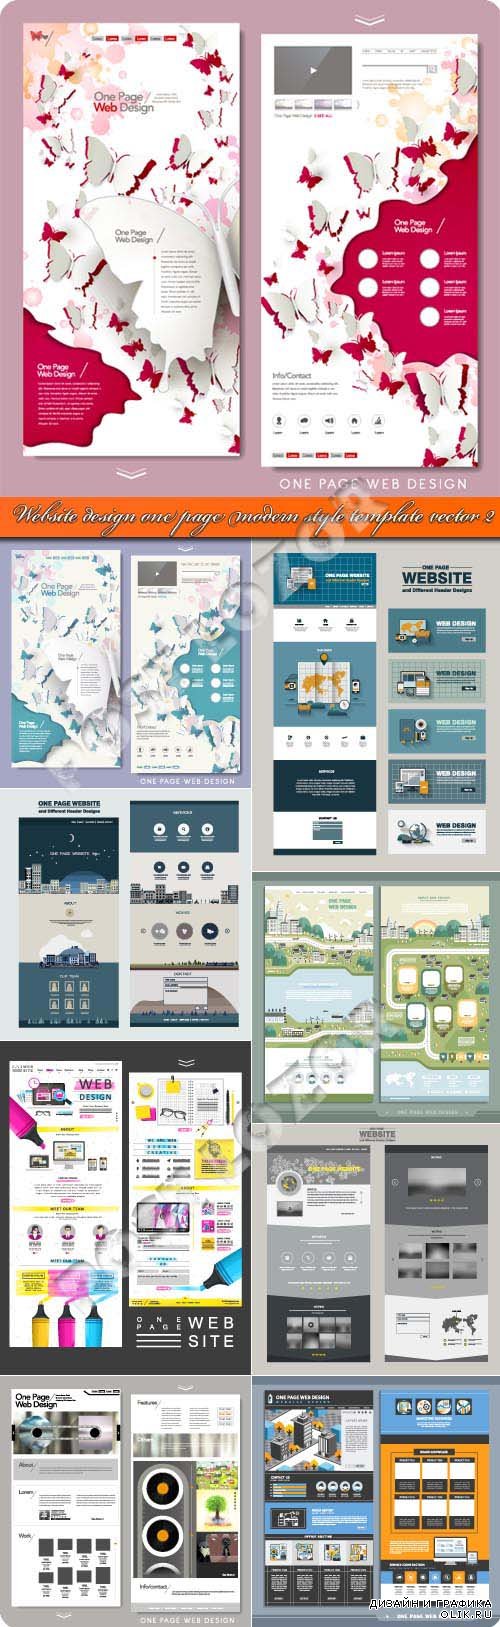 Website design one page modern style template vector 2